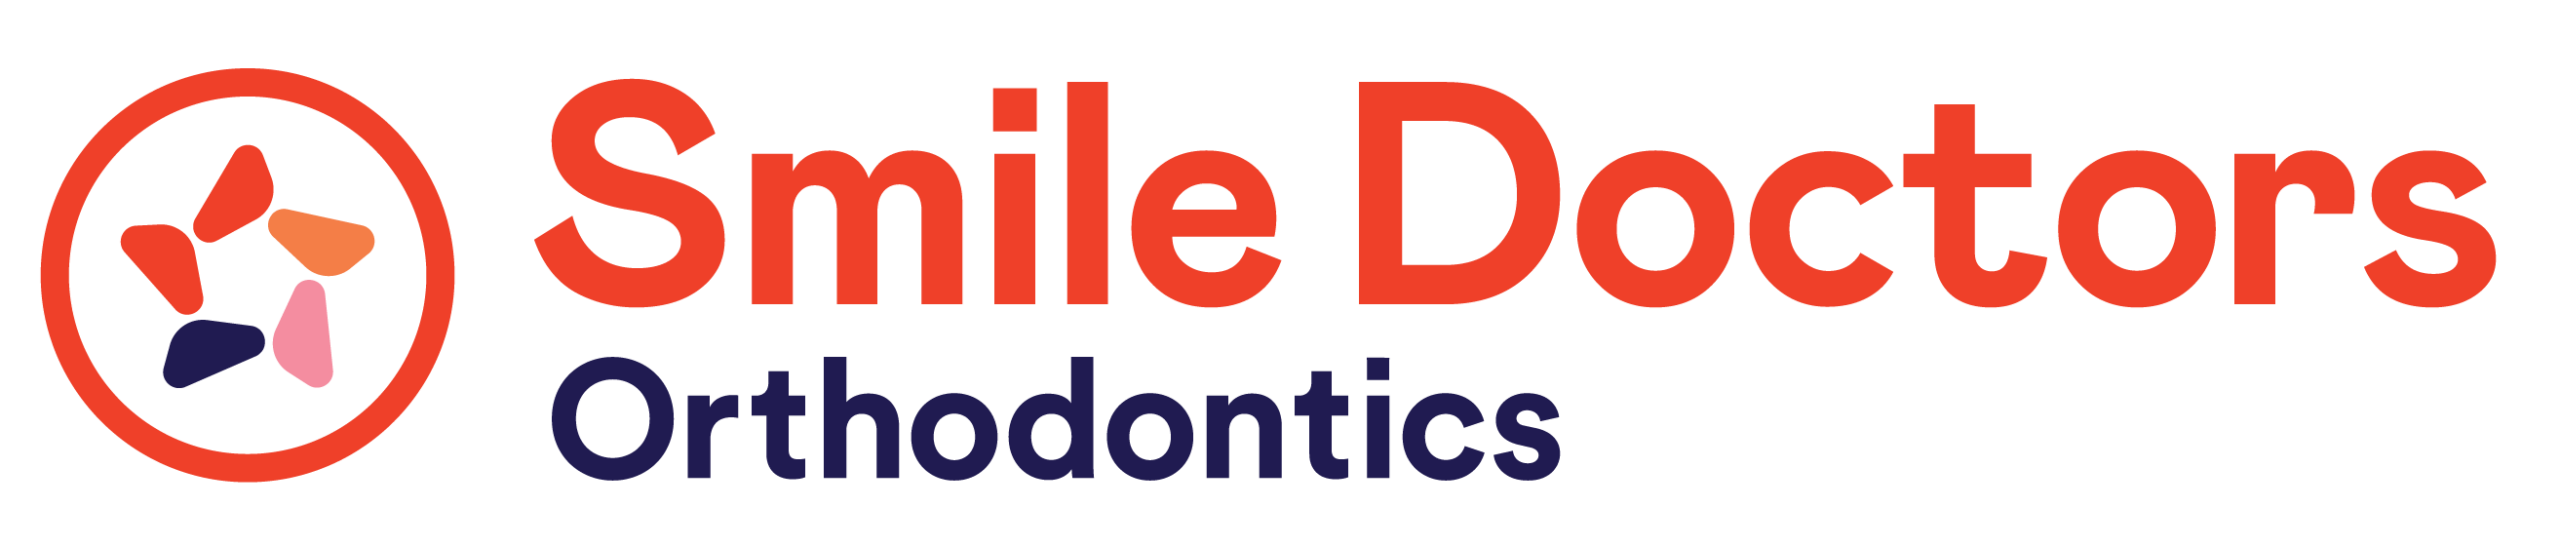 Smile Doctors Affiliates with Nine New Practices in Q2 2021, Including First in Maryland